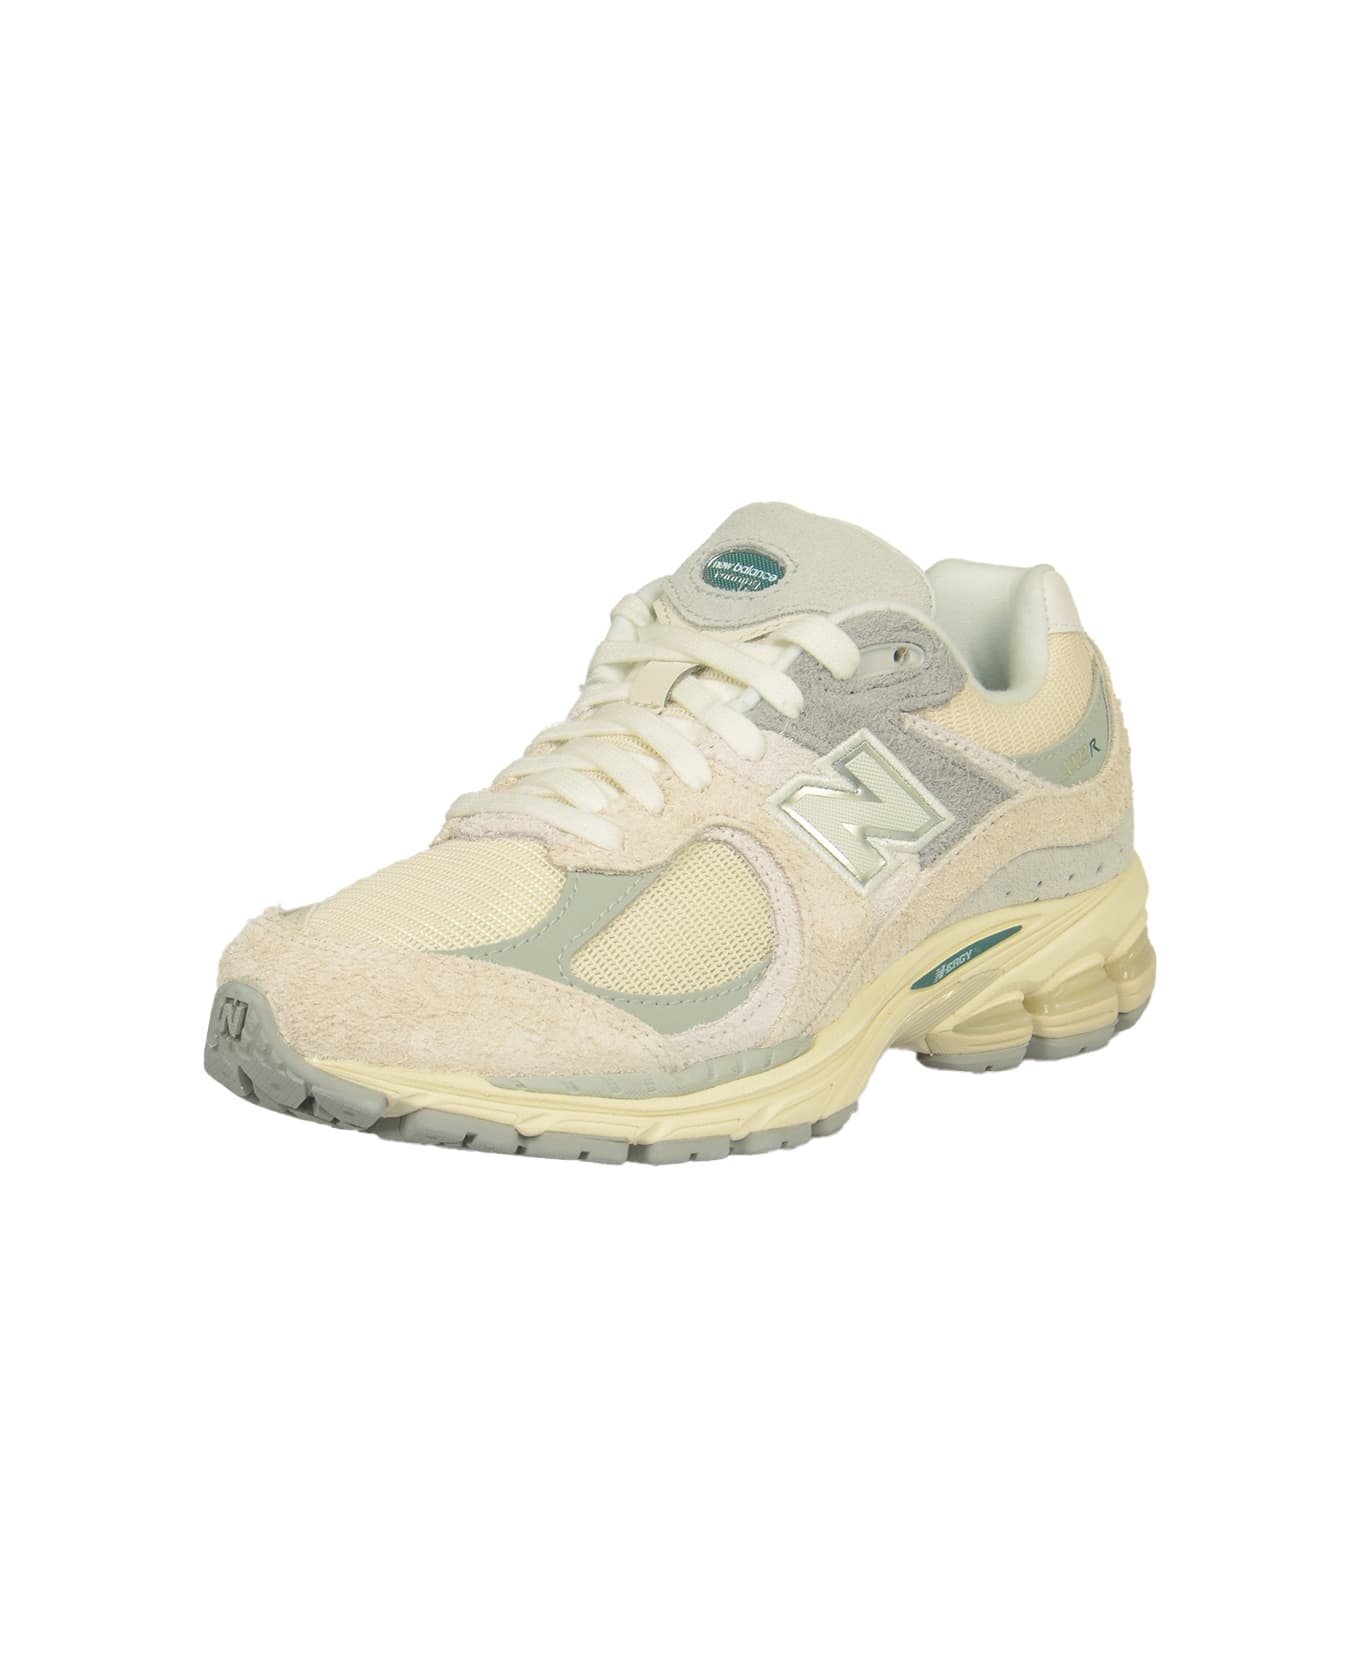 New Balance Logo Patched Sneakers - MULTICOLOR